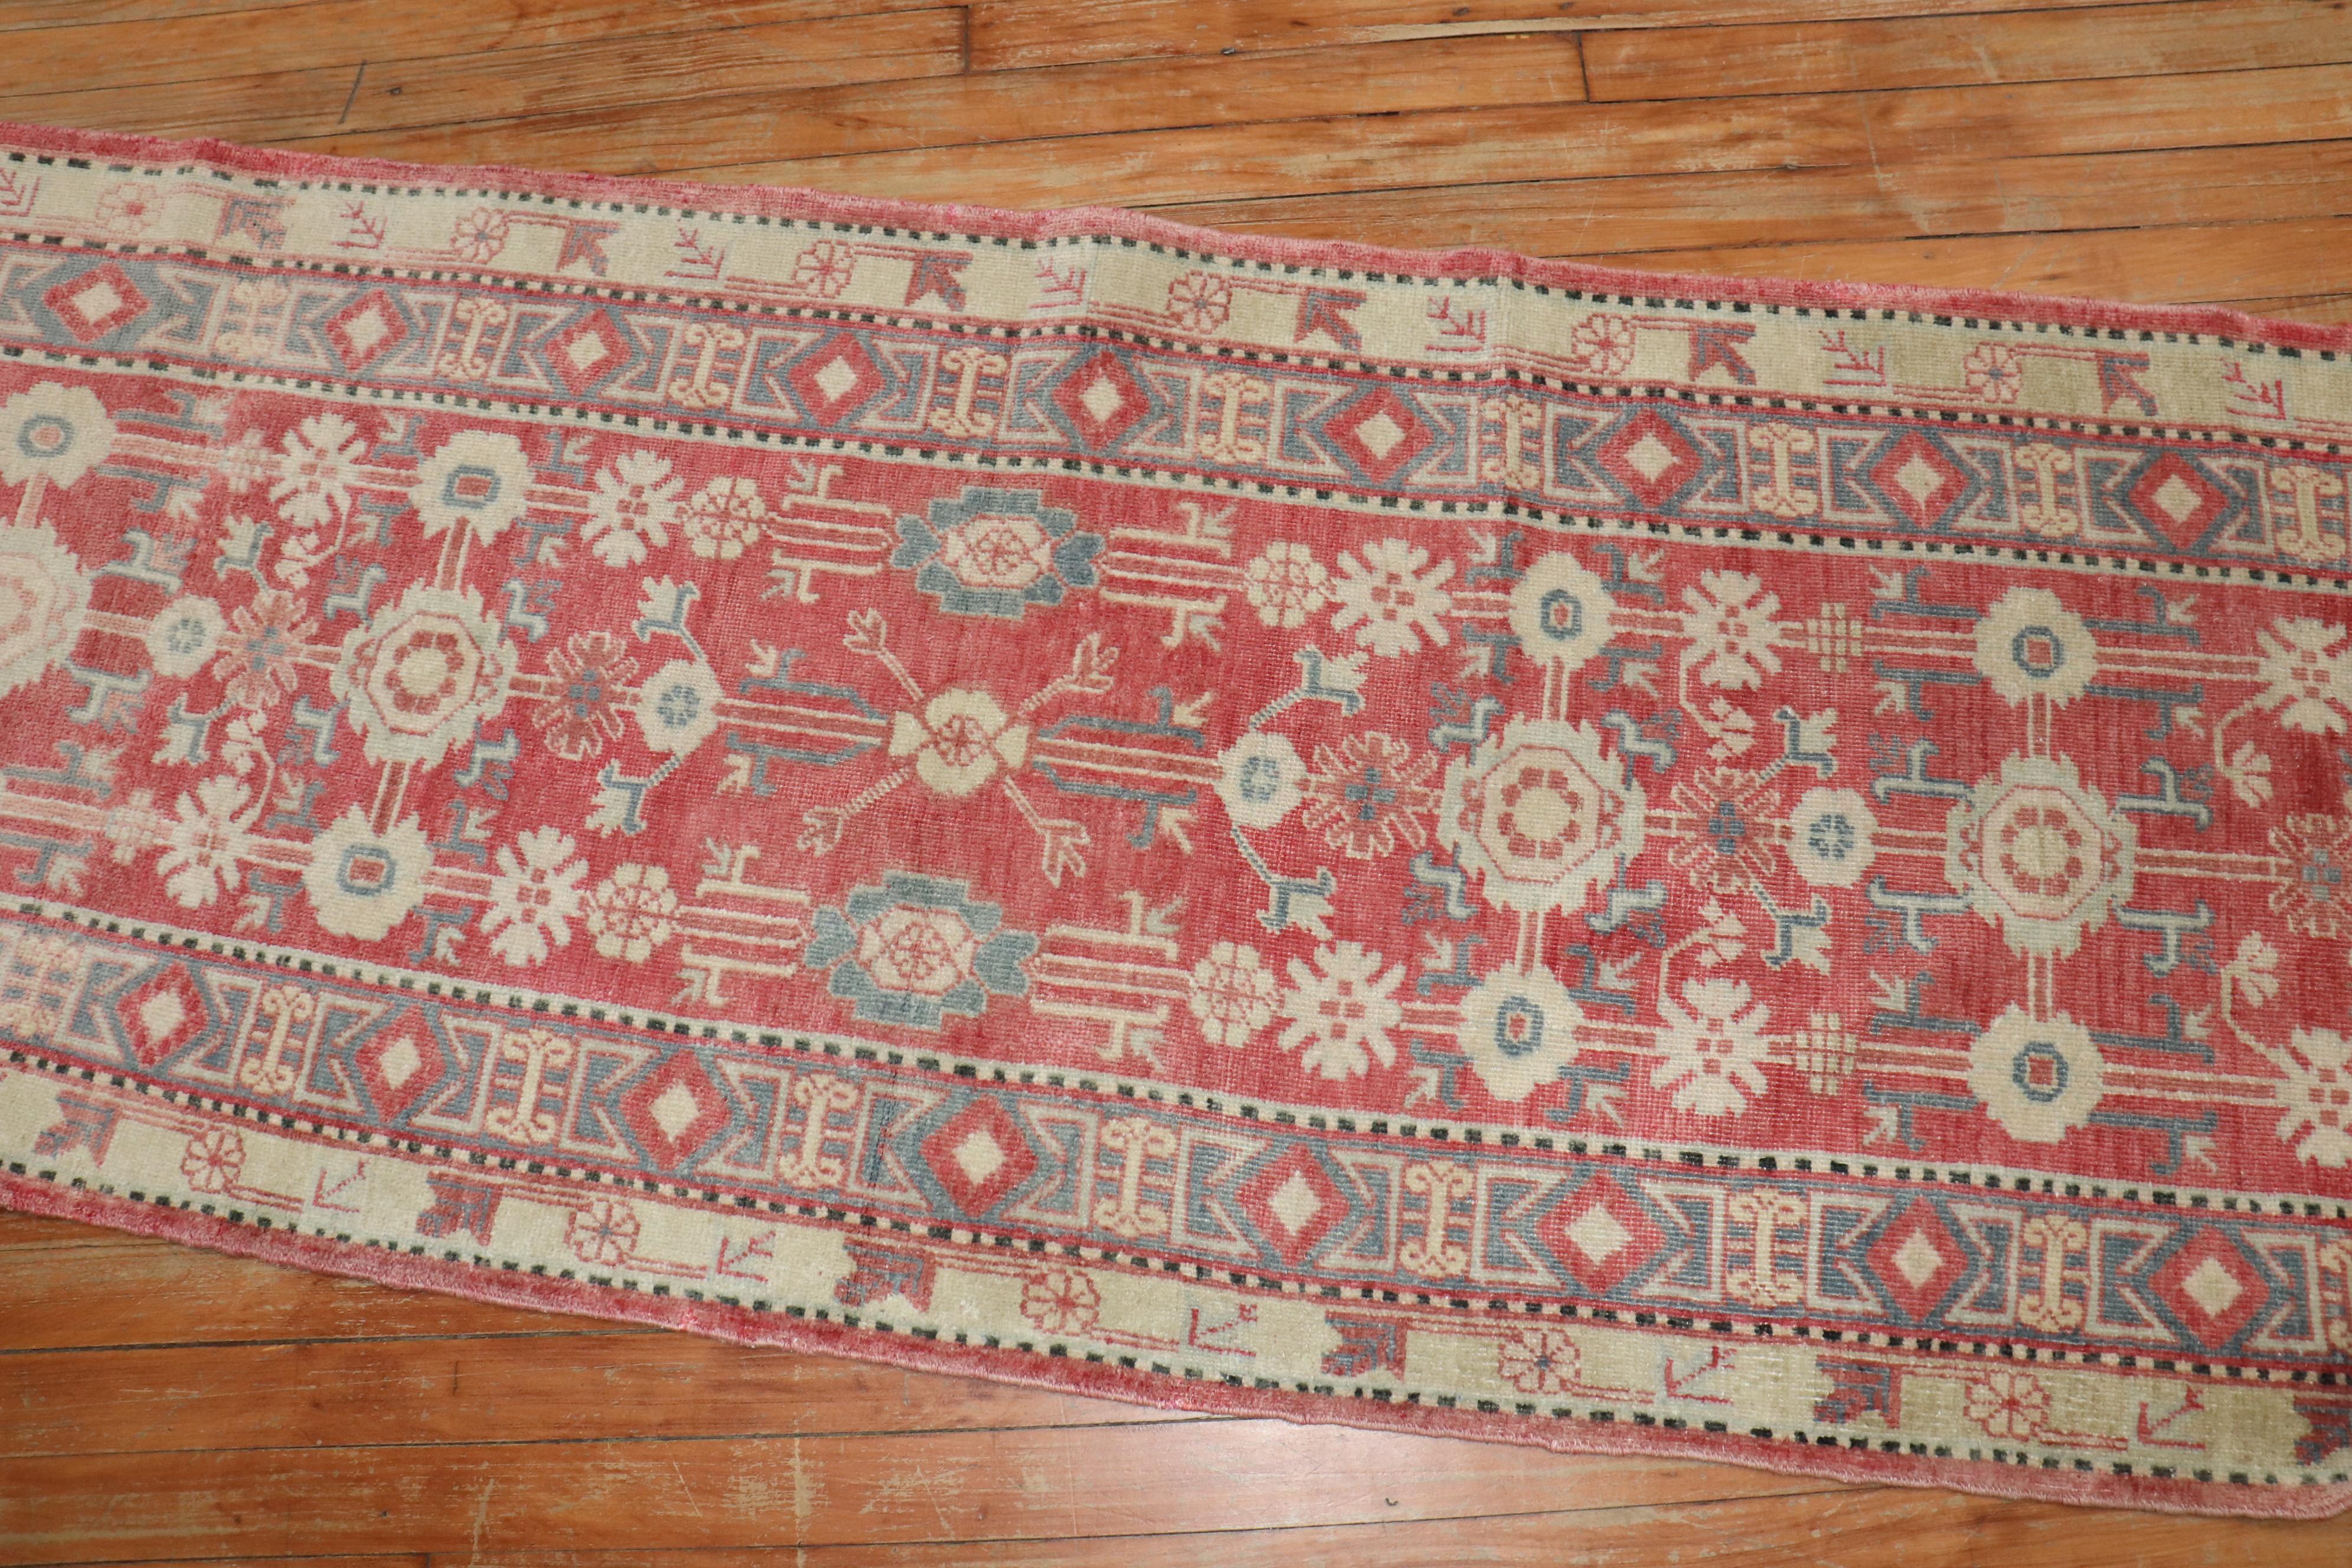 Narrow and short one-of-a-kind Khotan runner from the 3rd quarter of the 20th century

2'5'' x 7'11''